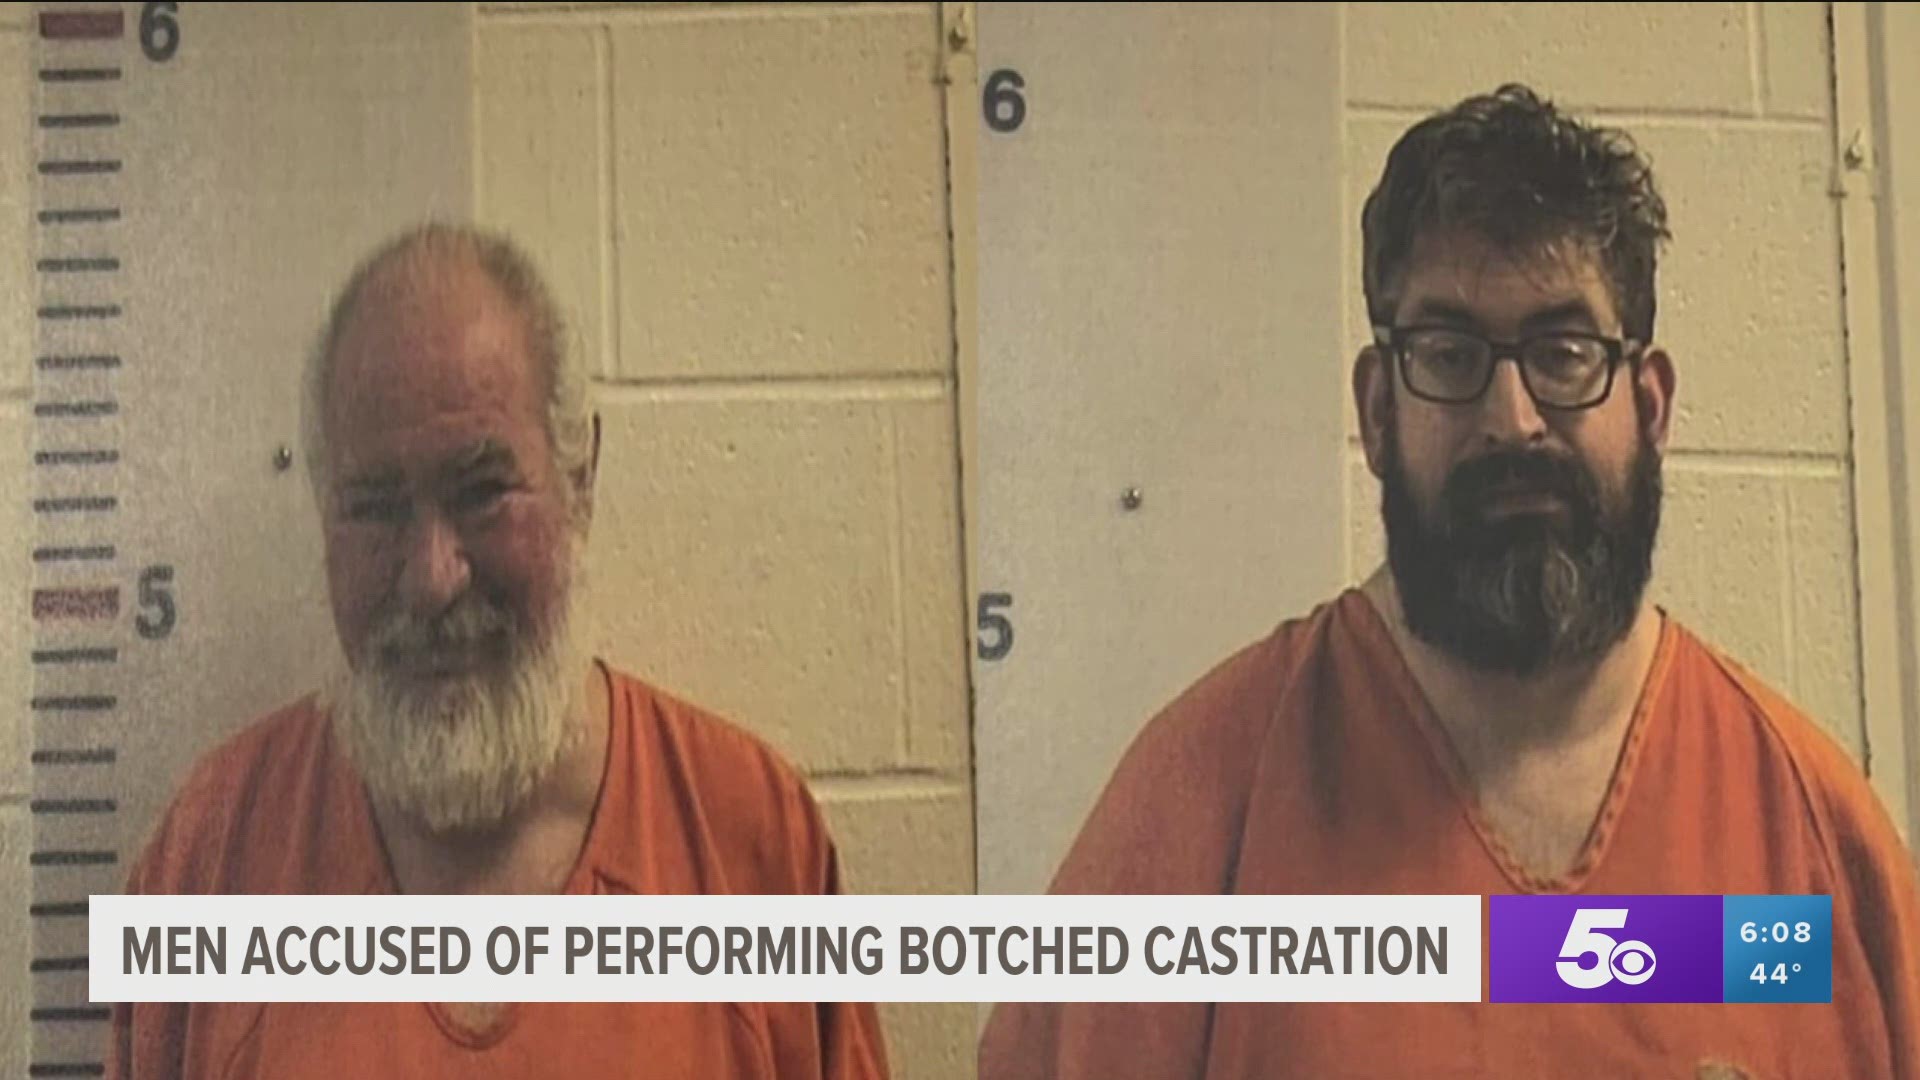 Two Oklahoma men are accused of performing a botched castration on a Virginia man, leading to their arrest. https://bit.ly/3mhvyQC